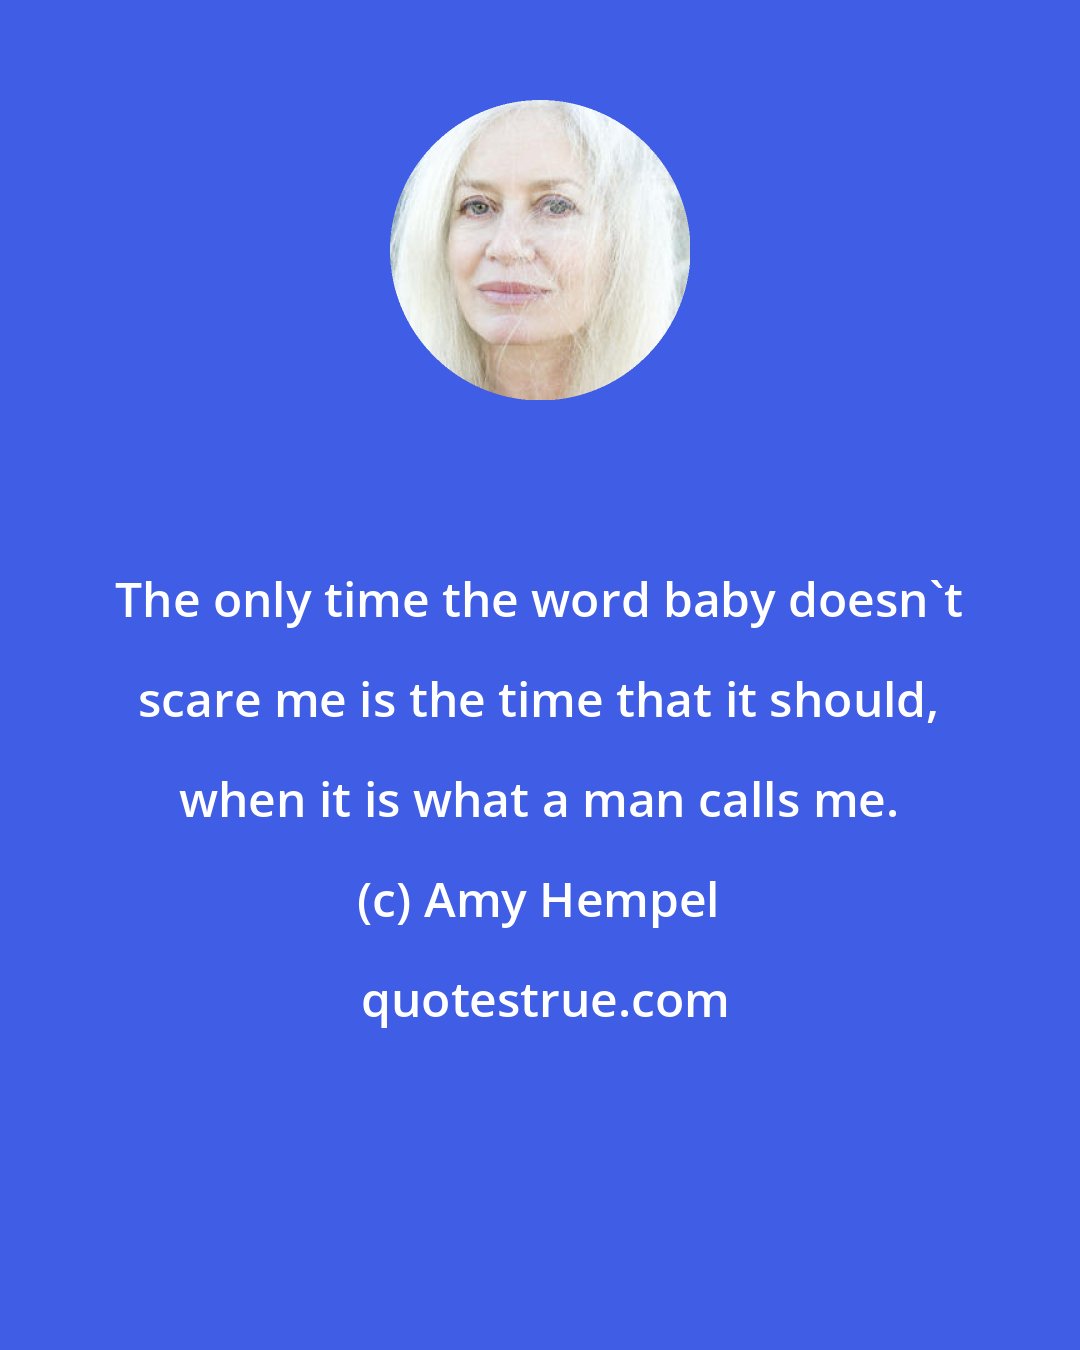 Amy Hempel: The only time the word baby doesn't scare me is the time that it should, when it is what a man calls me.